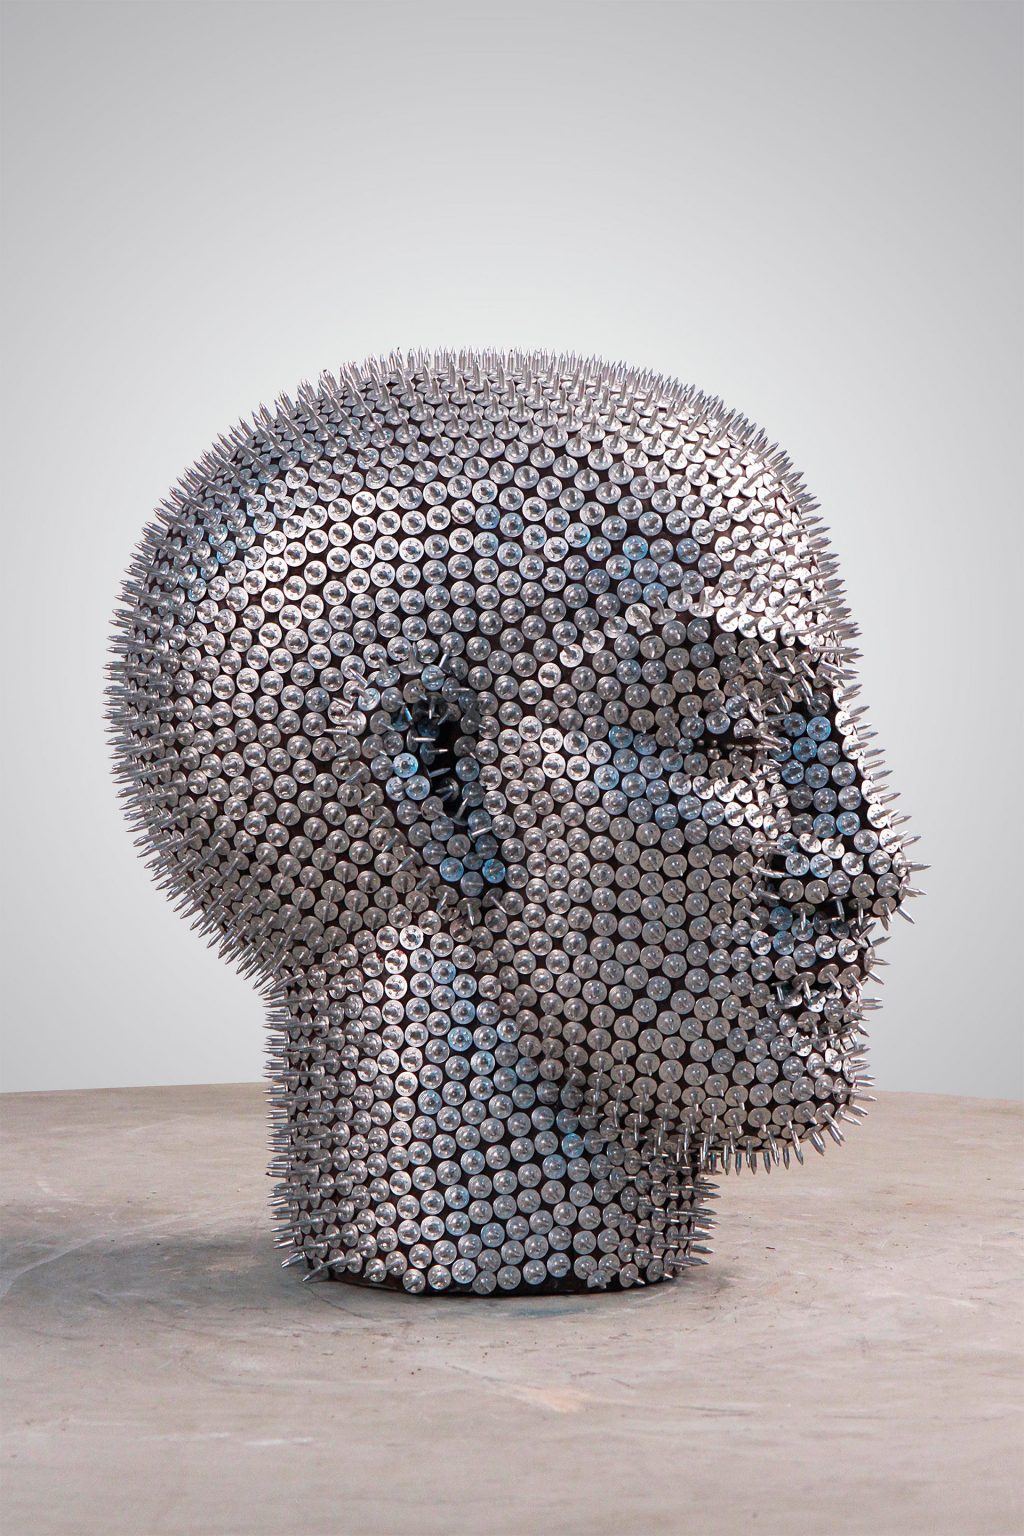 Masked Figures: Sculptures by Anton Smit | Daily design inspiration for ...